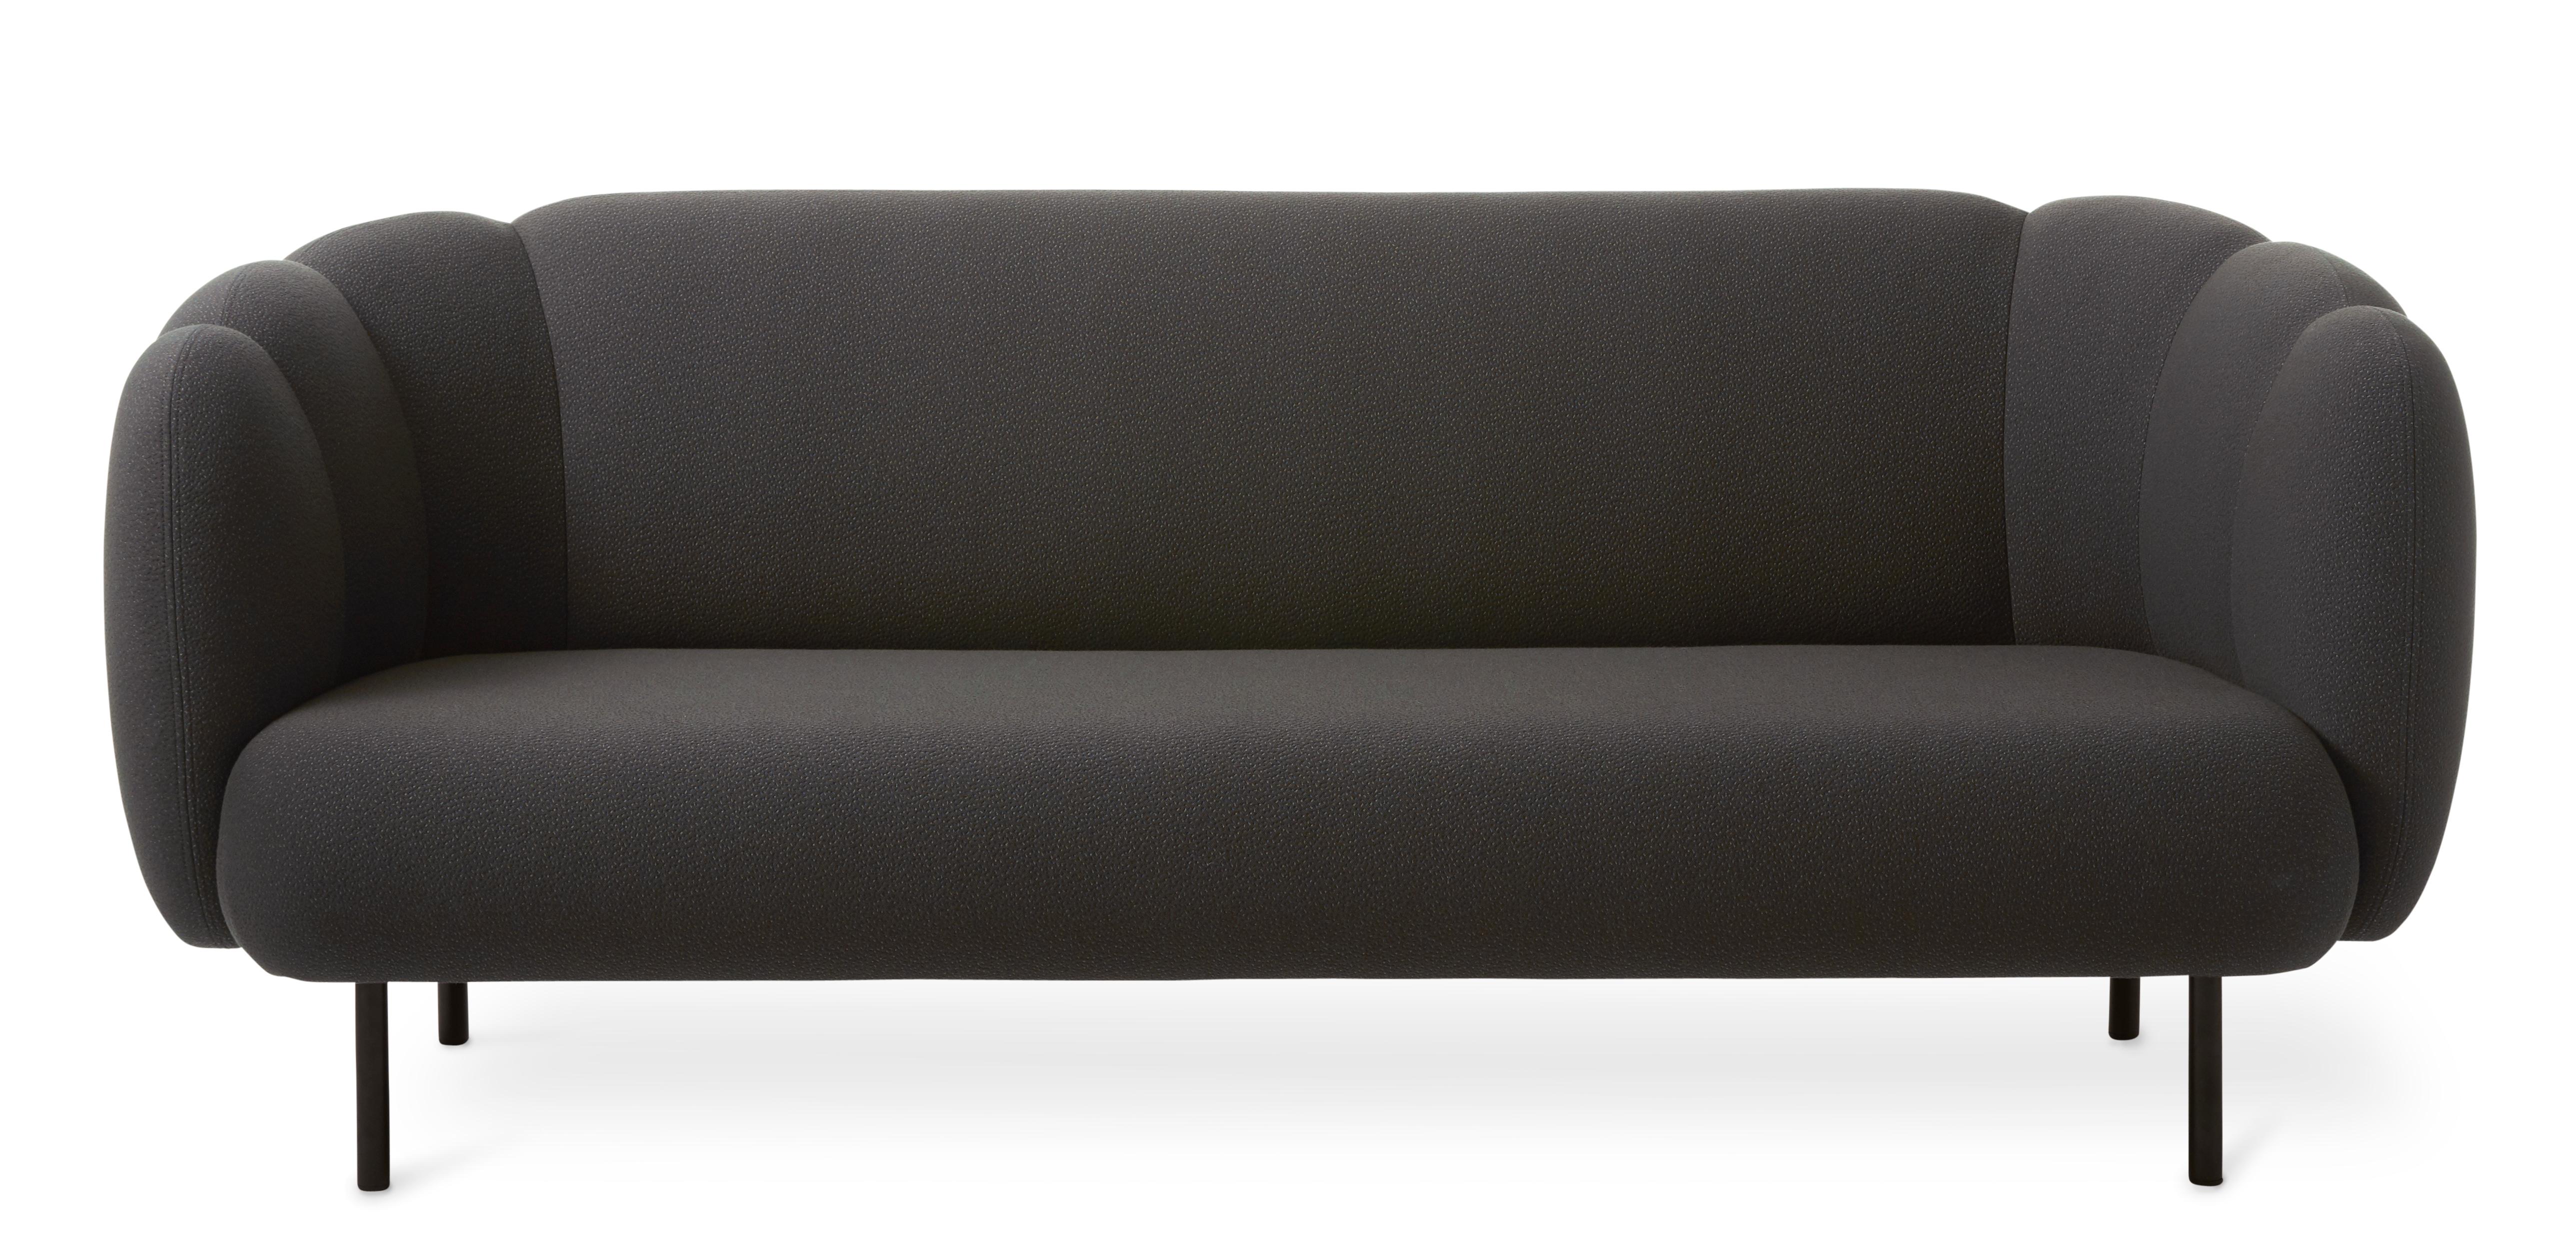 For Sale: Gray (Sprinkles 294) Cape 3-Seat Stitch Sofa, by Charlotte Høncke from Warm Nordic